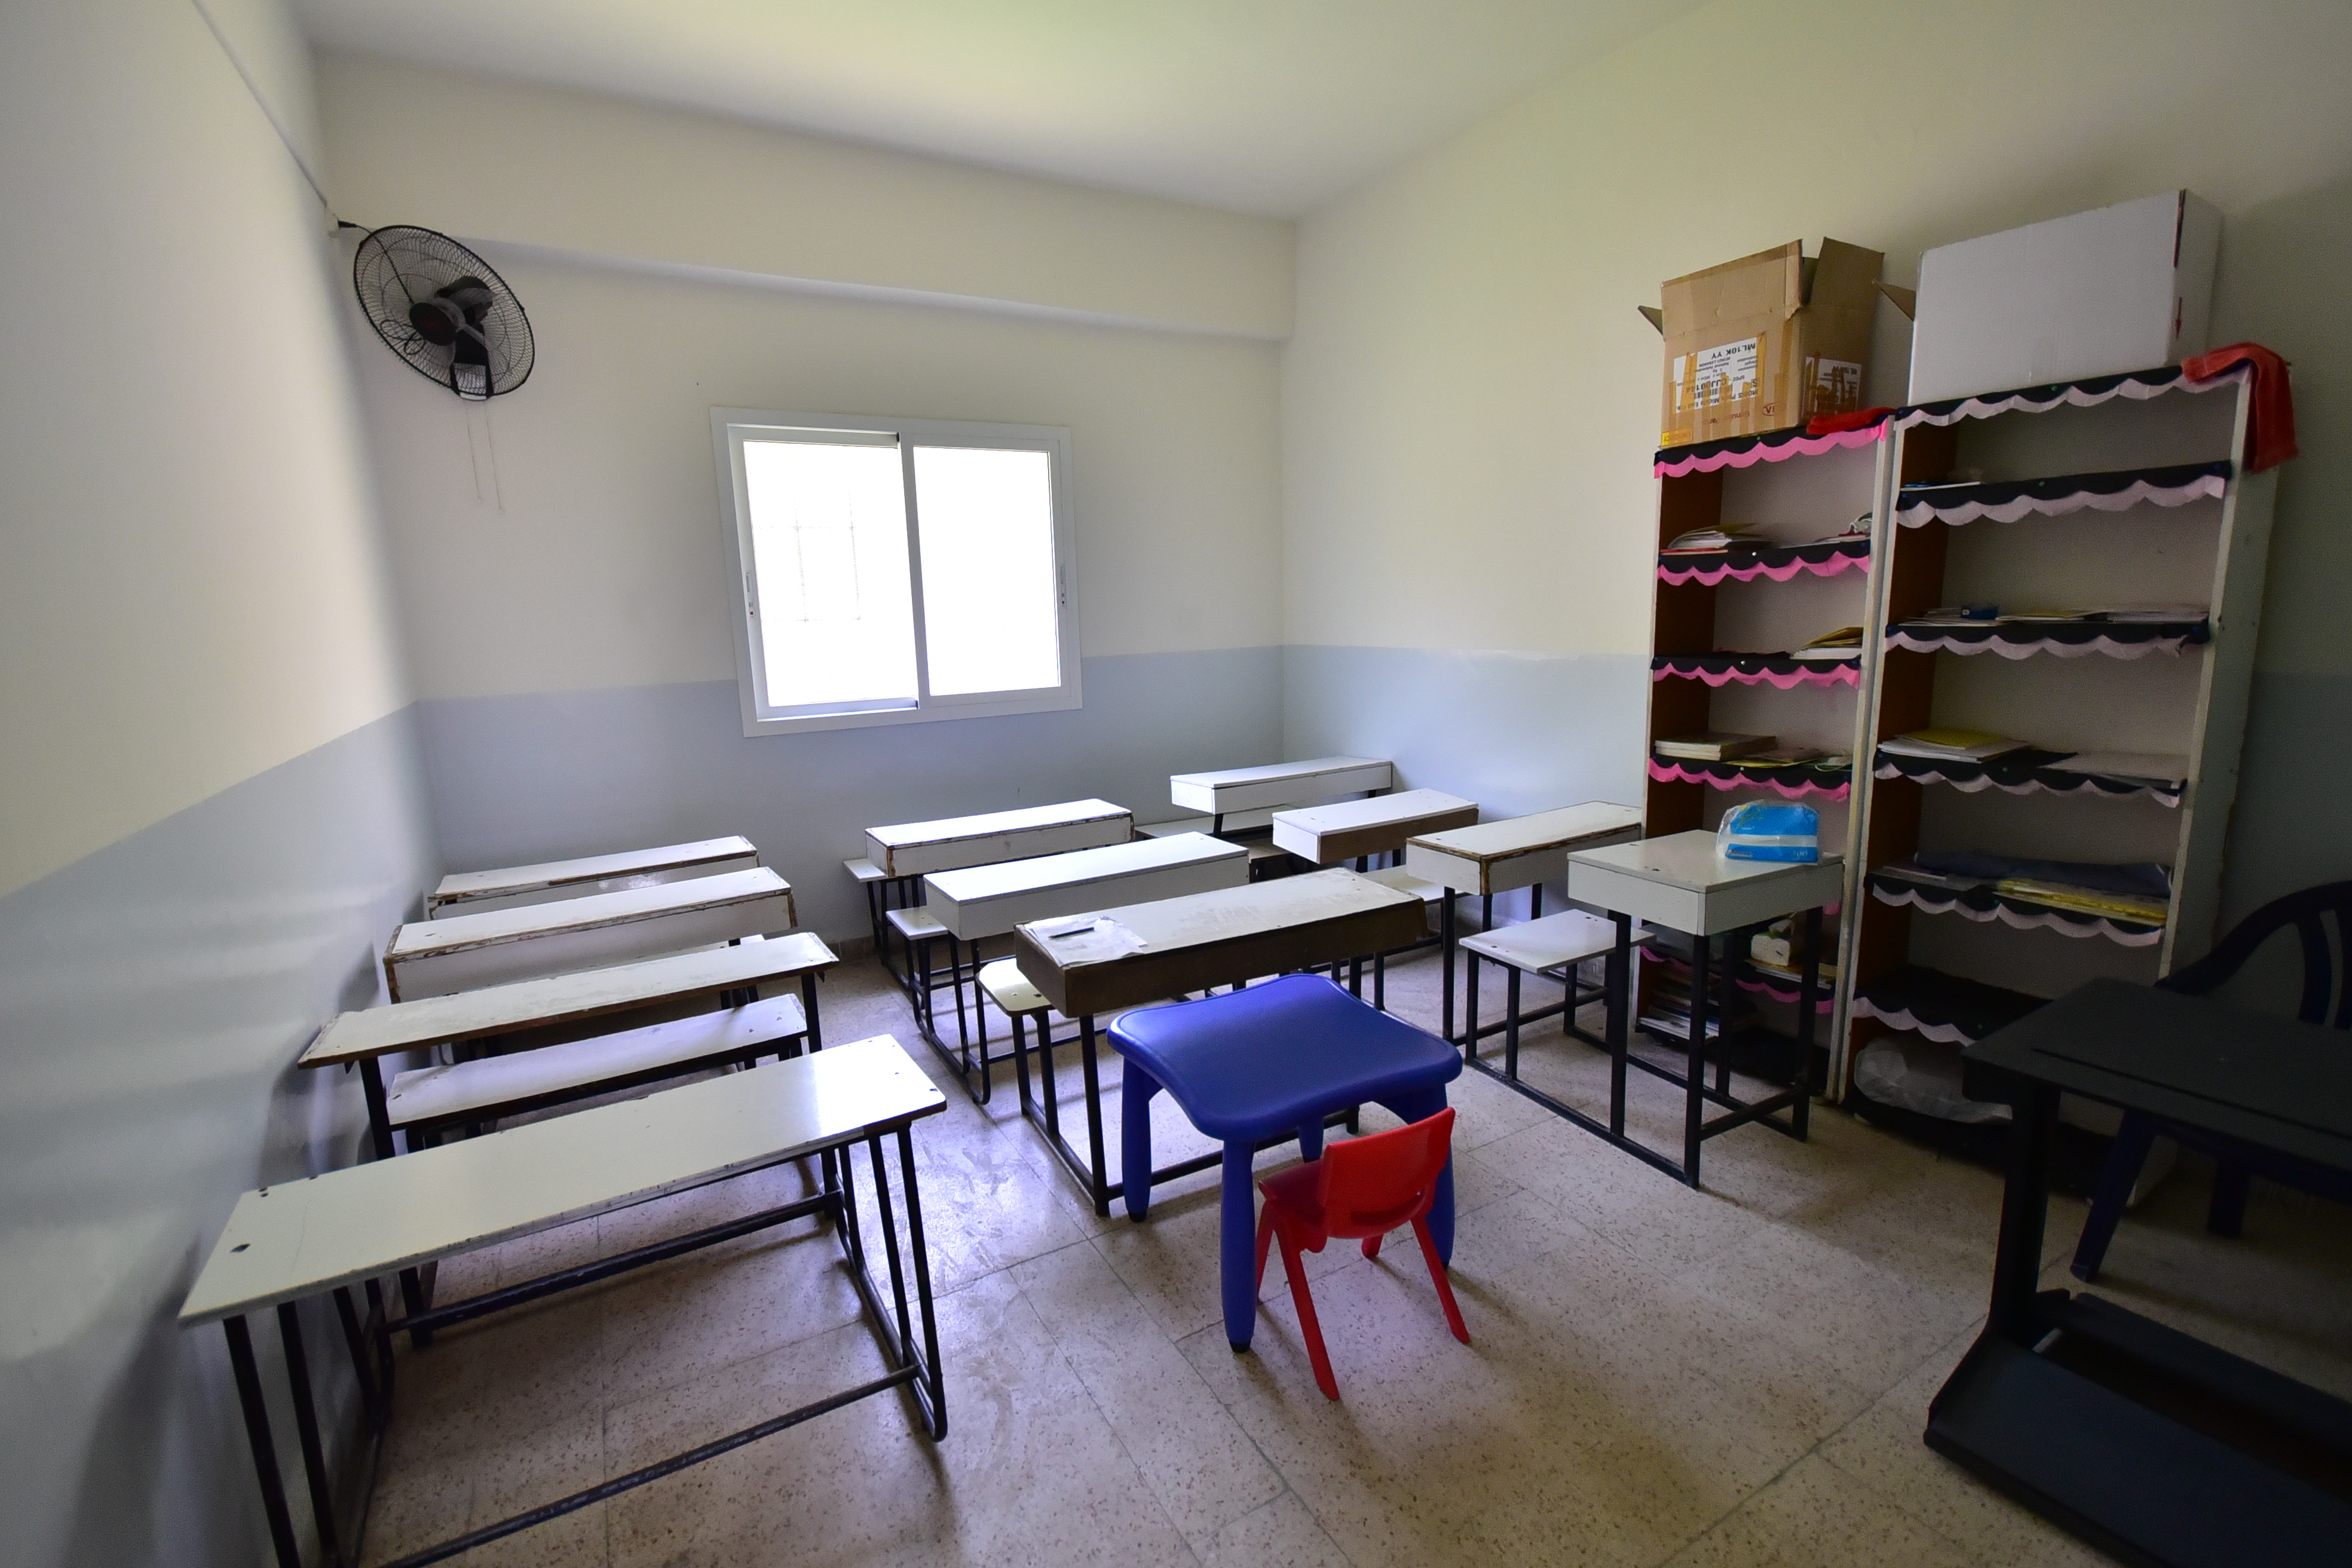  Beirut - Renovation of the Saint Joseph Brothers School and access to education for vulnerable c-3